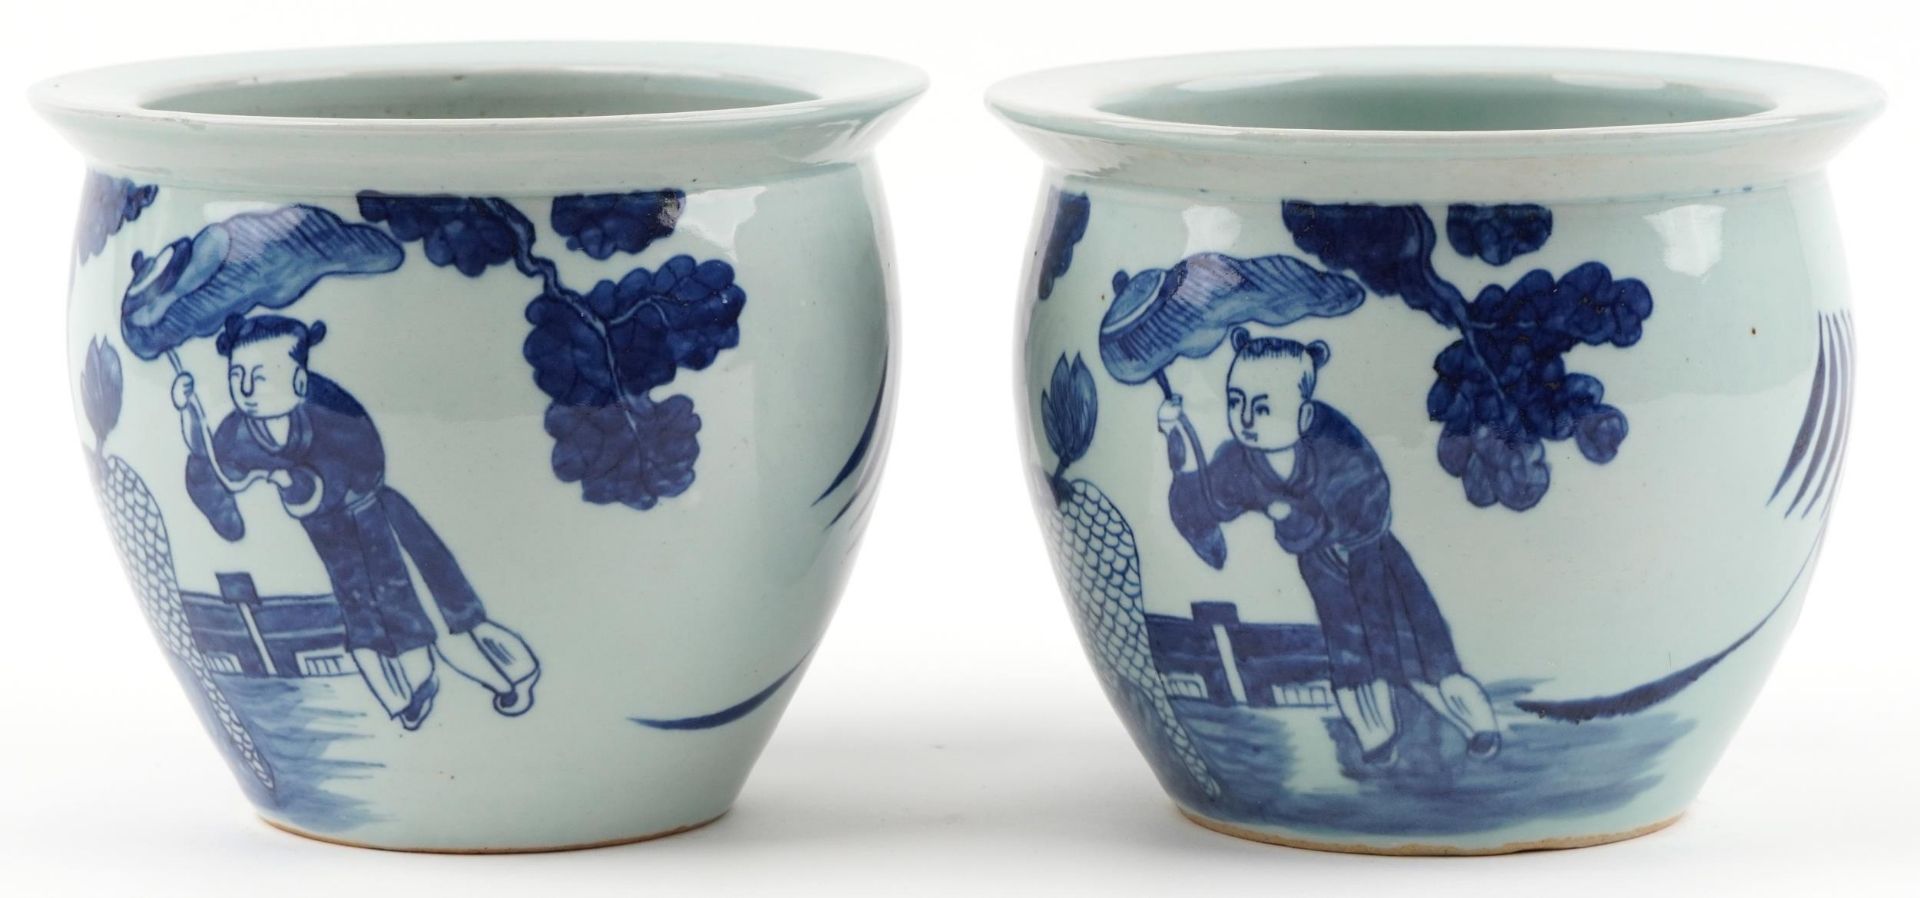 Pair of Chinese blue and white porcelain jardinieres painted with children playing in a palace - Image 2 of 6